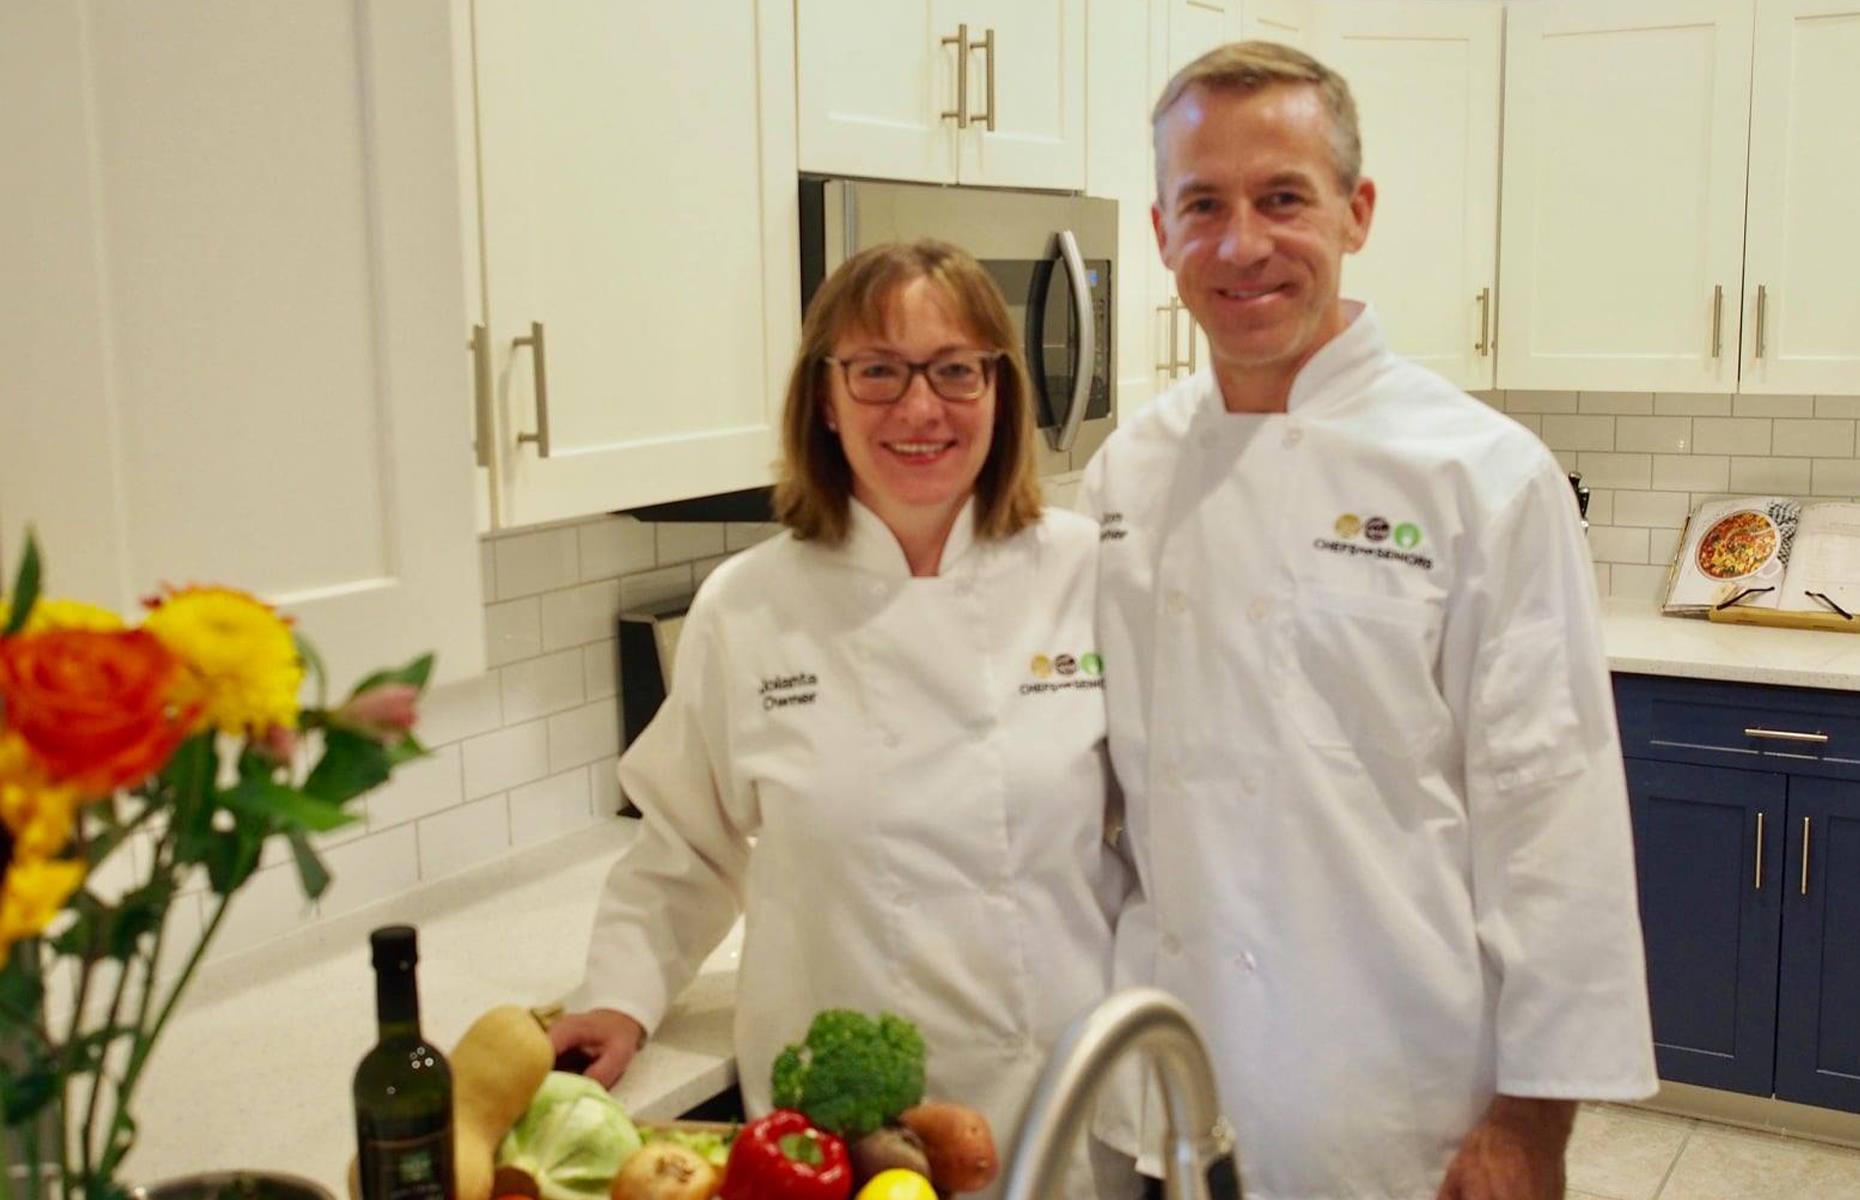 Chefs For Seniors, lowest initial investment: $8,000